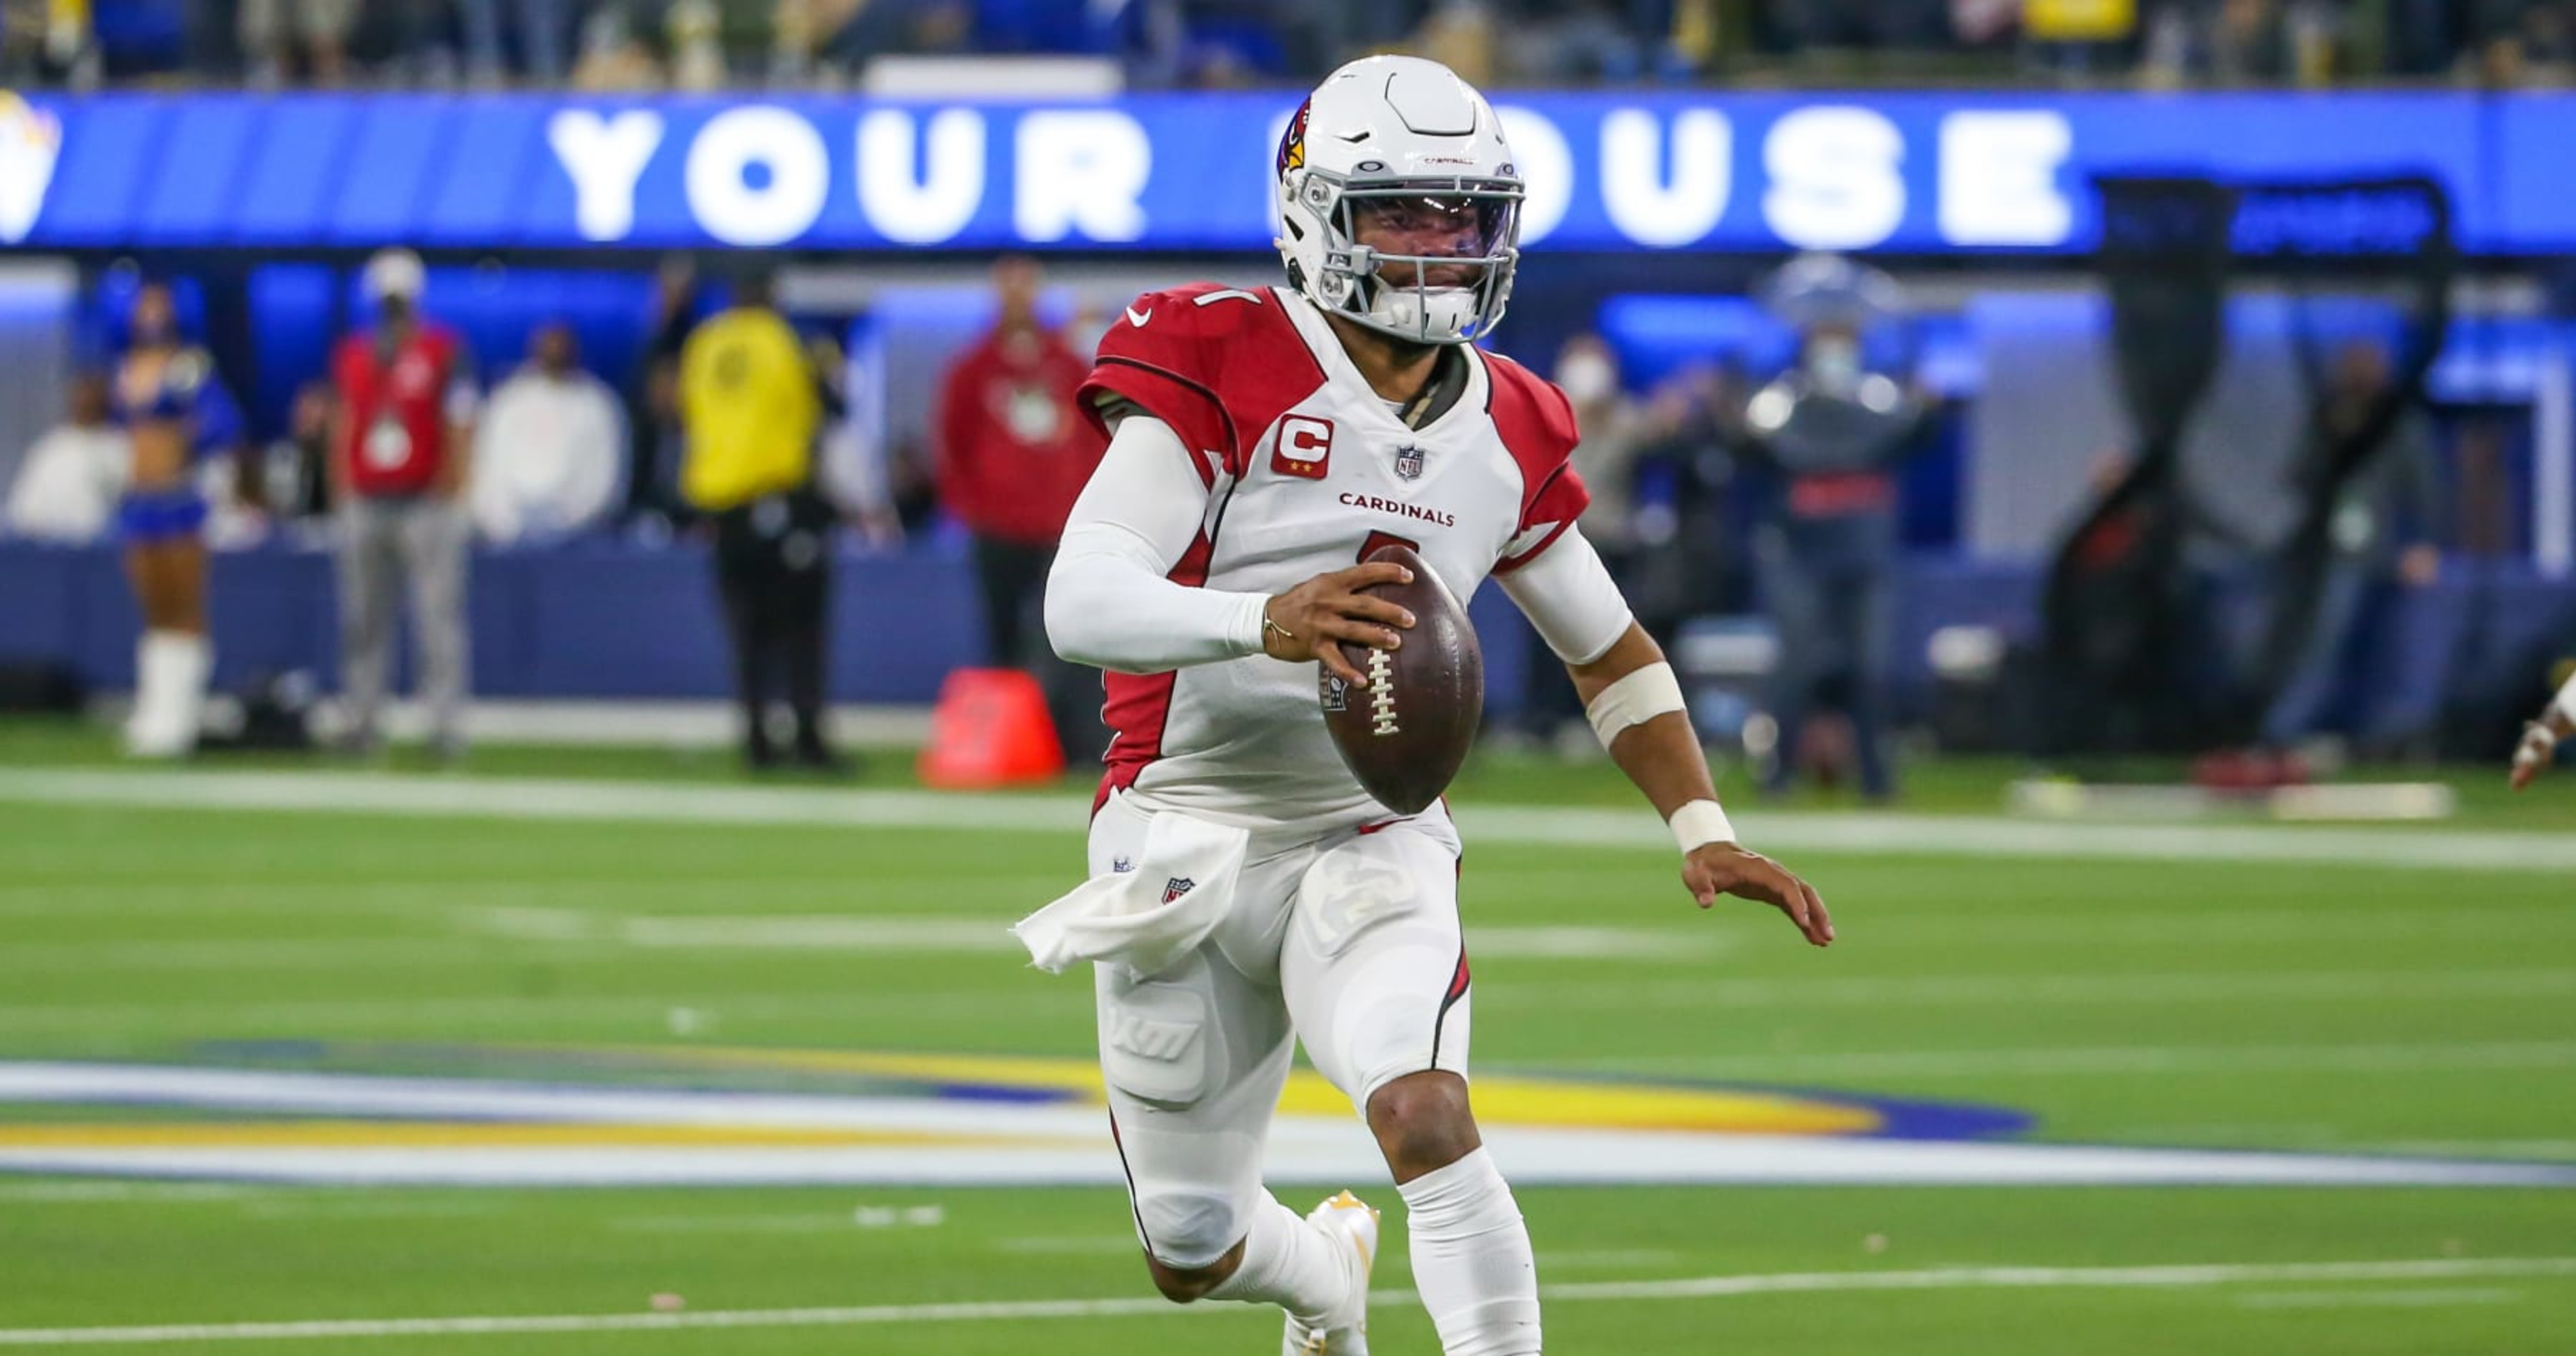 Kyler Murray replaces kid's lost autographed jersey